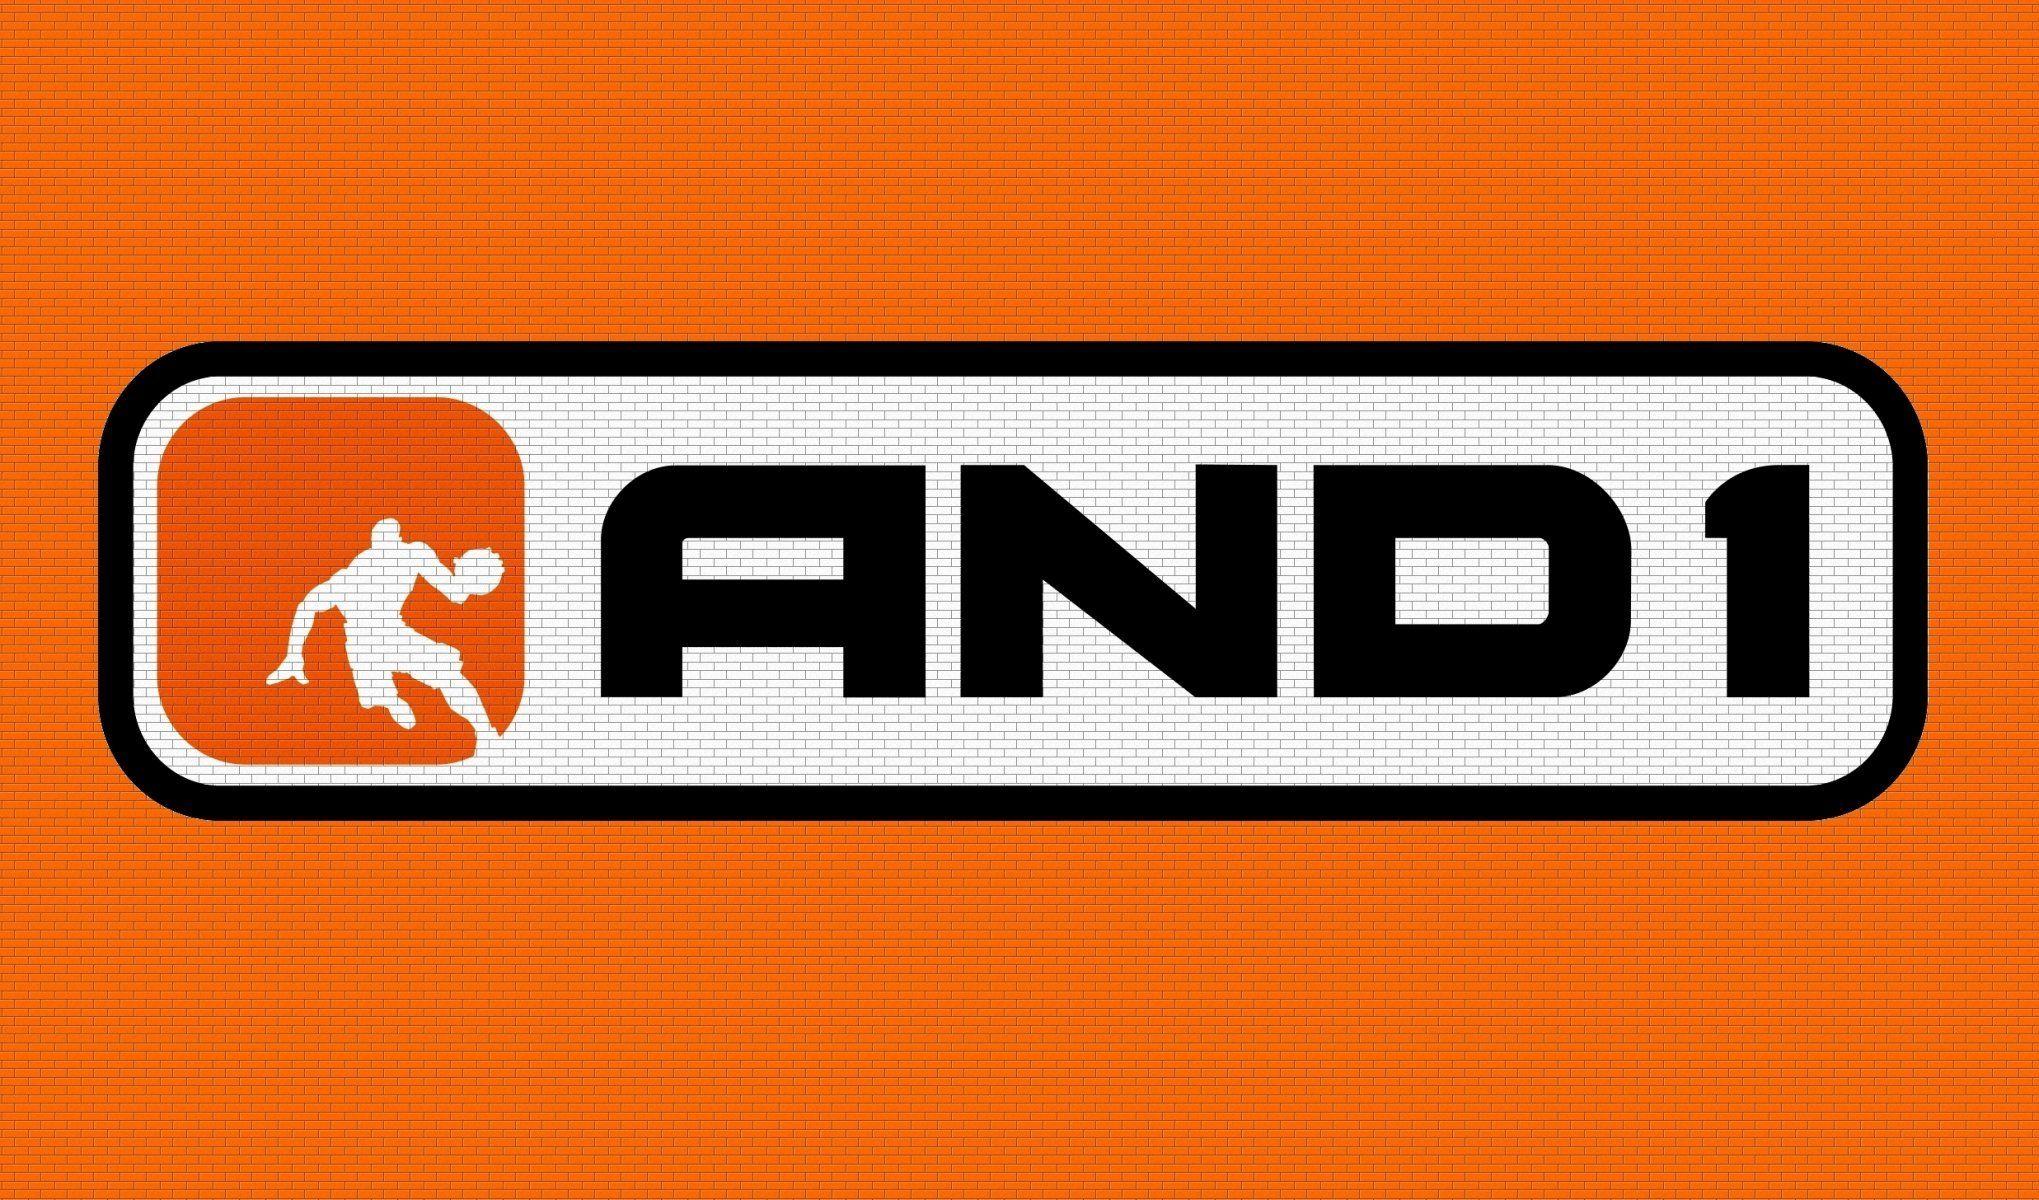 And1 Logo - AND1 Wallpapers - Wallpaper Cave